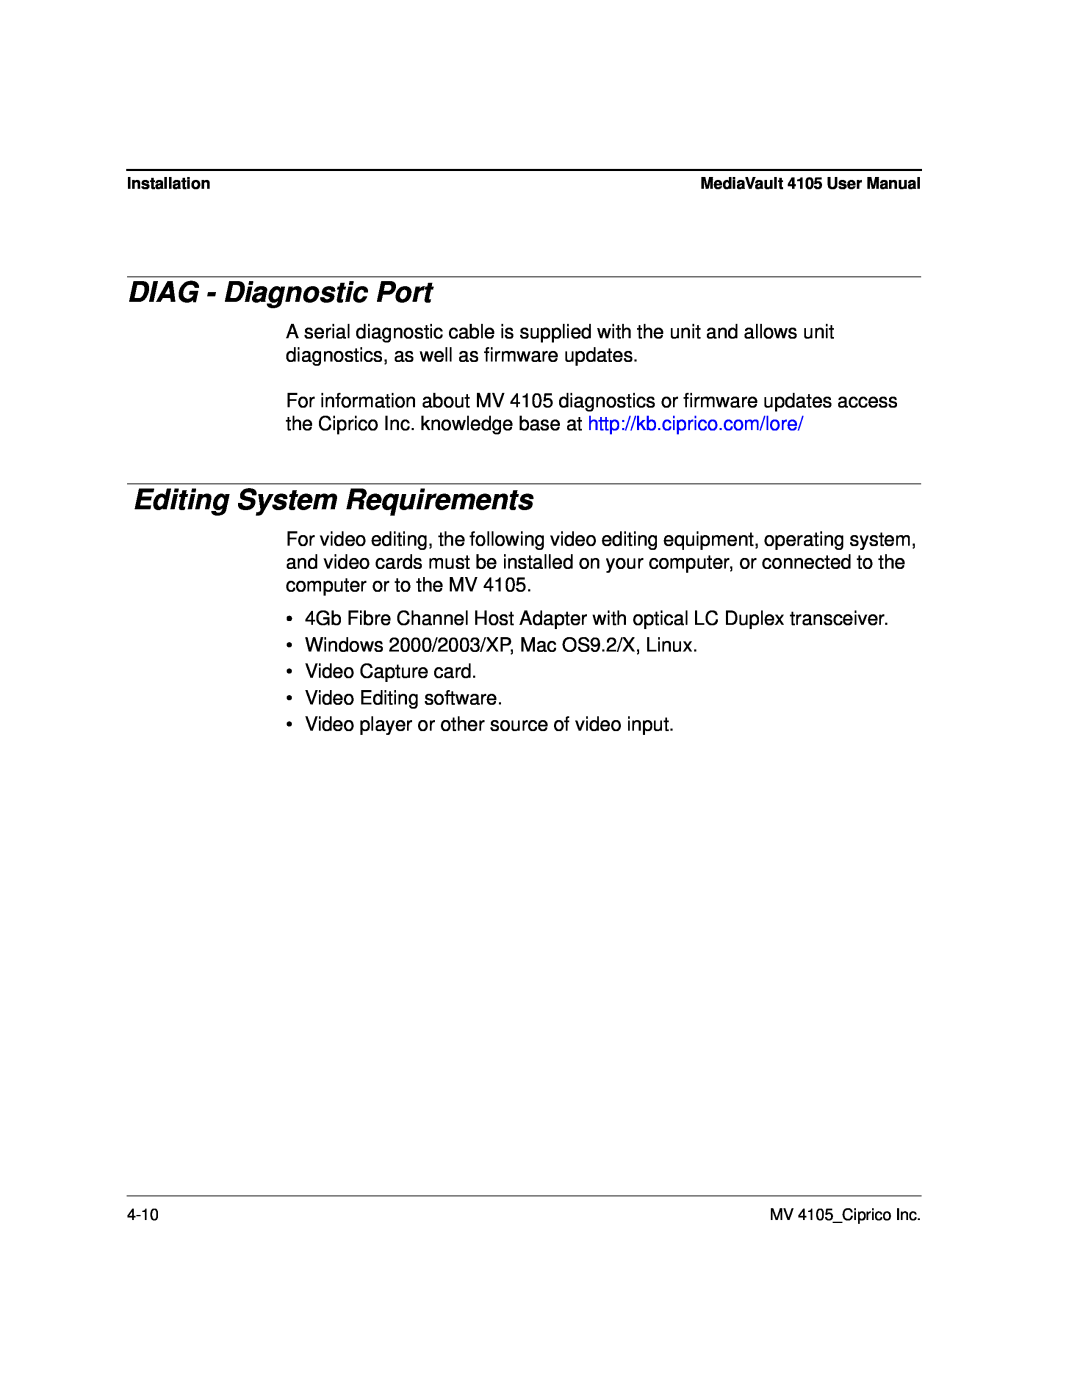 Ciprico 4105 Series user manual DIAG - Diagnostic Port, Editing System Requirements 